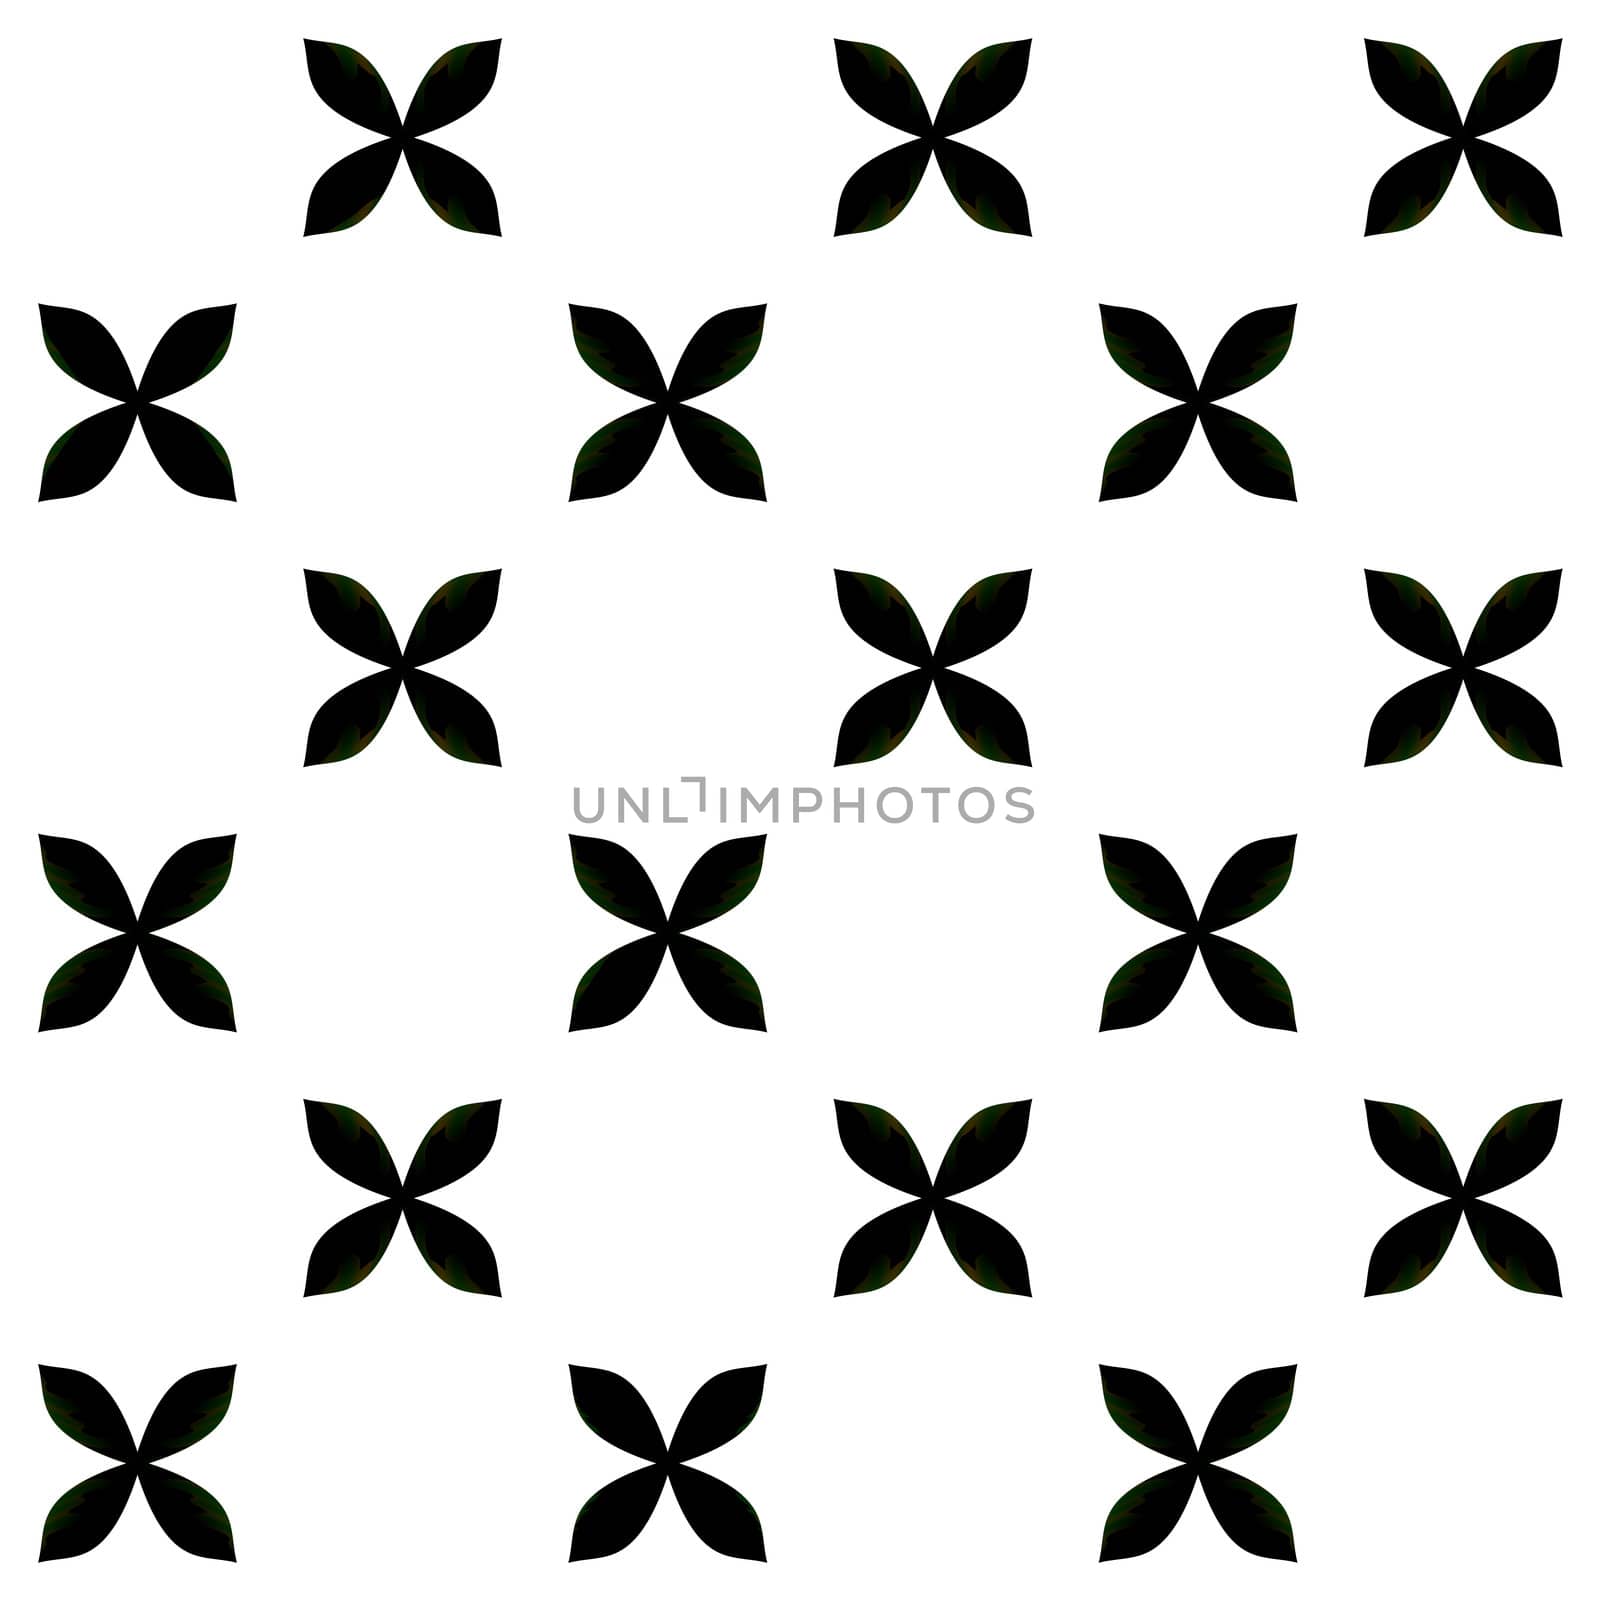 An abstract illustration of a repeating pattern in a floral design.